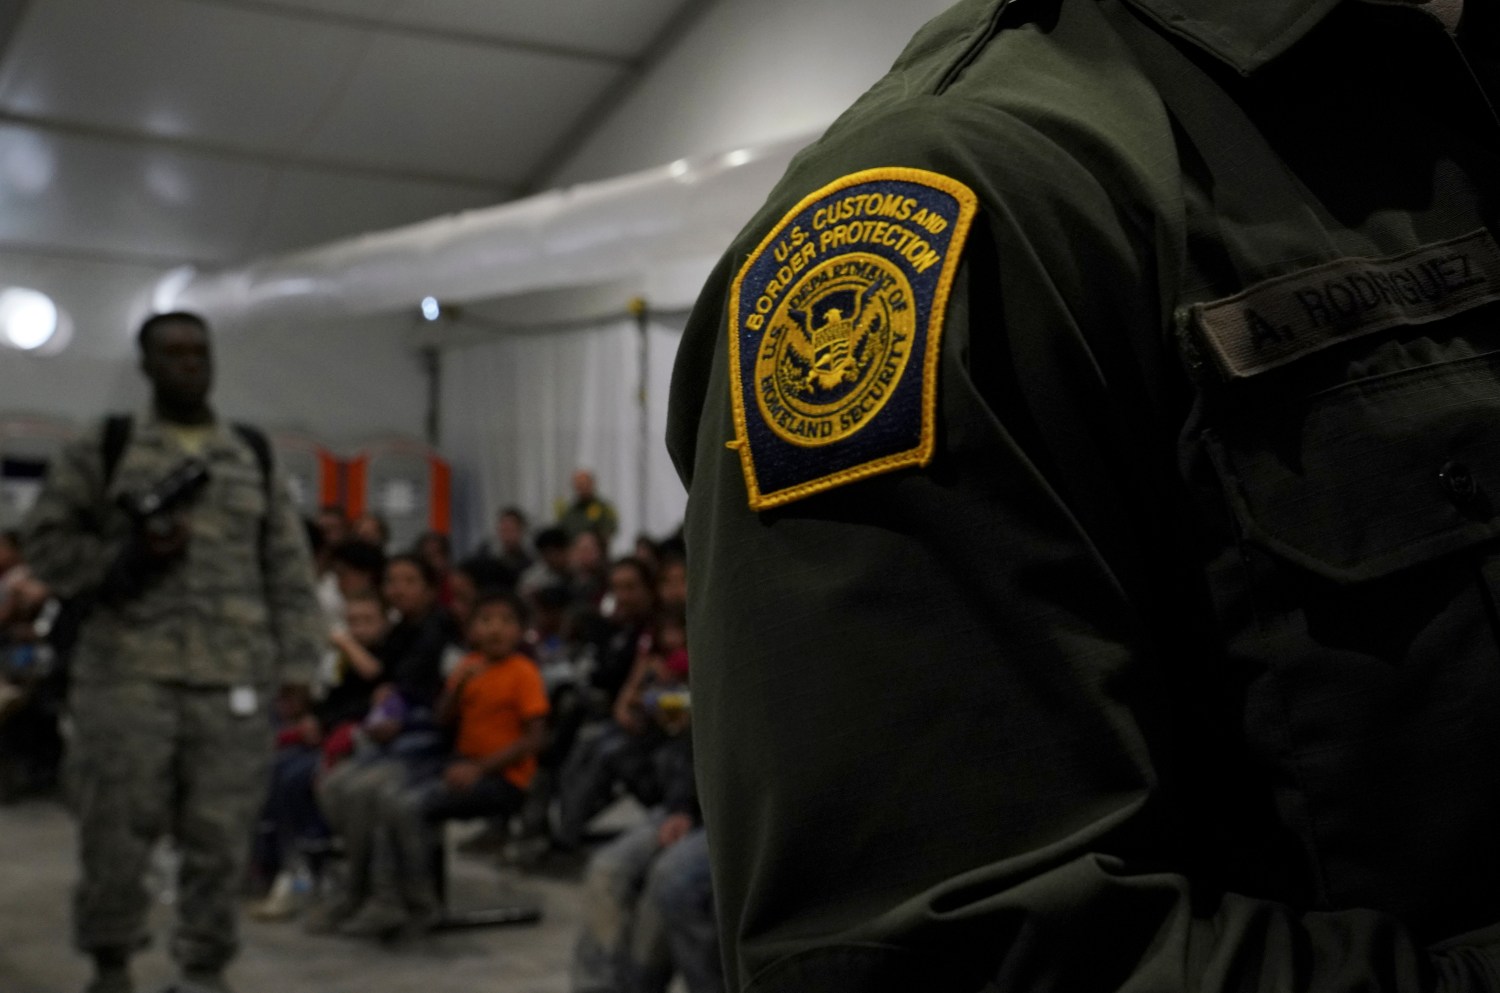 A Customs and Border Patrol officer stands near migrants at the Donna Soft-Sided Processing Facility in Donna, Texas, U.S. July 12, 2019. Picture taken July 12, 2019. REUTERS/Veronica G. Cardenas - RC15F00ADDE0